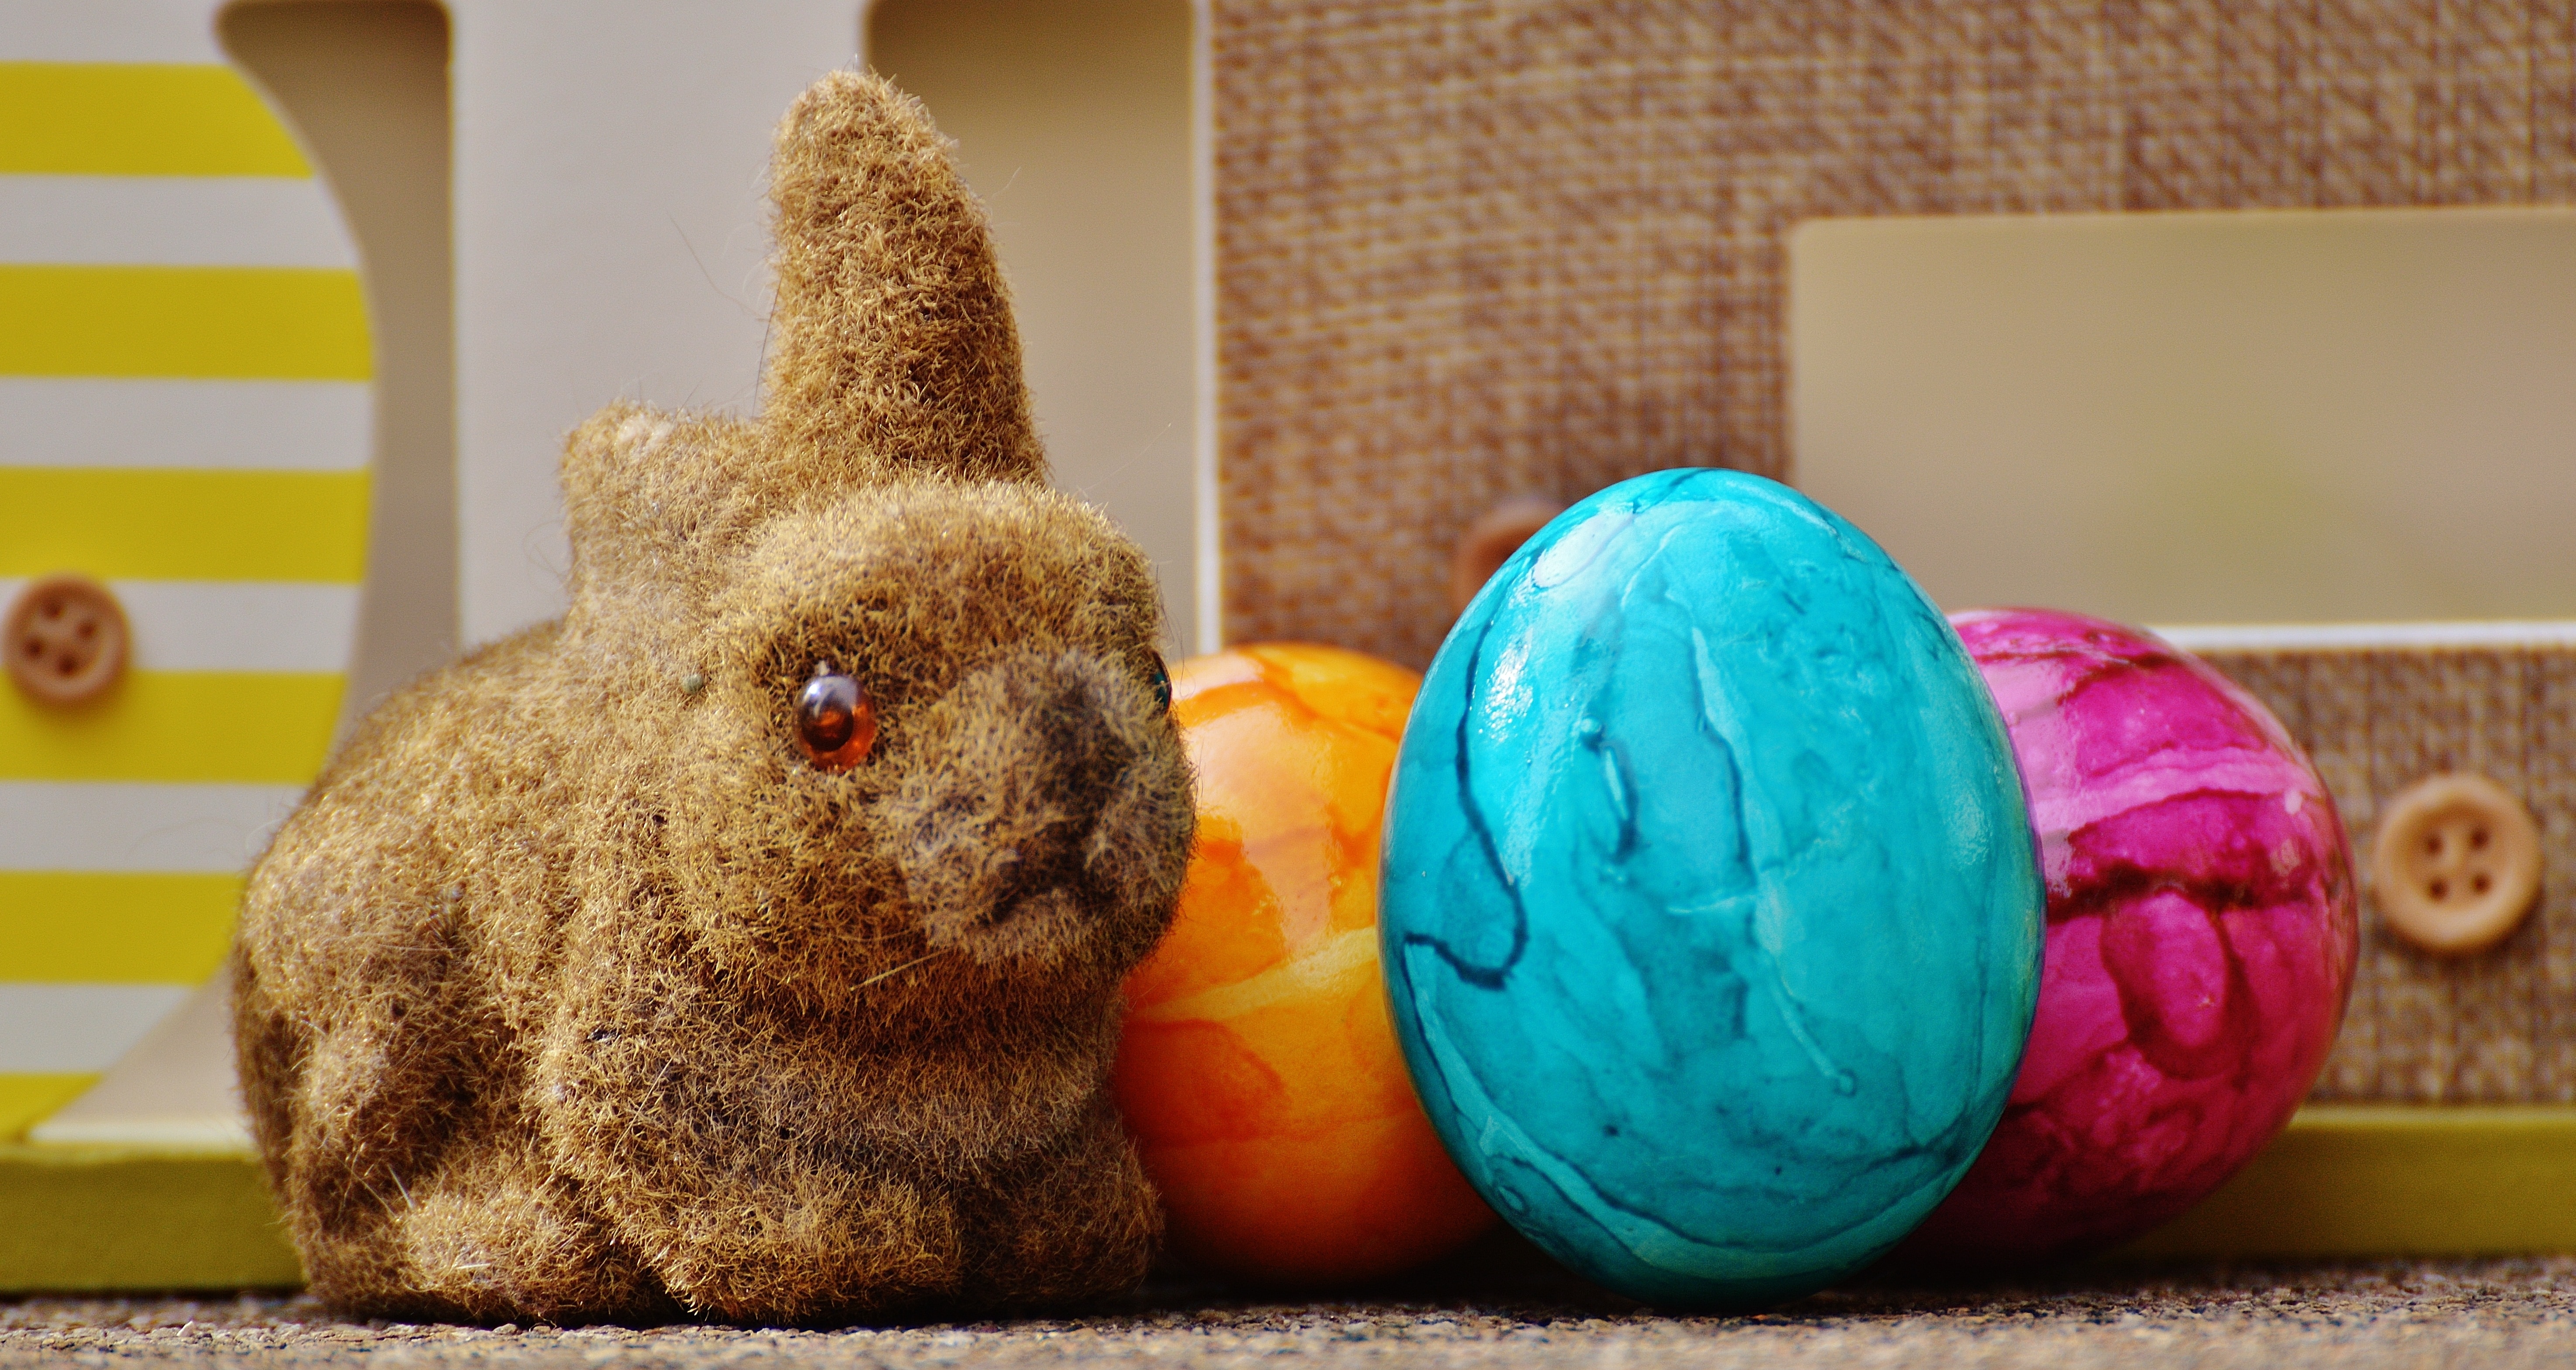 brown rabbit plush toy and three faberge eggs